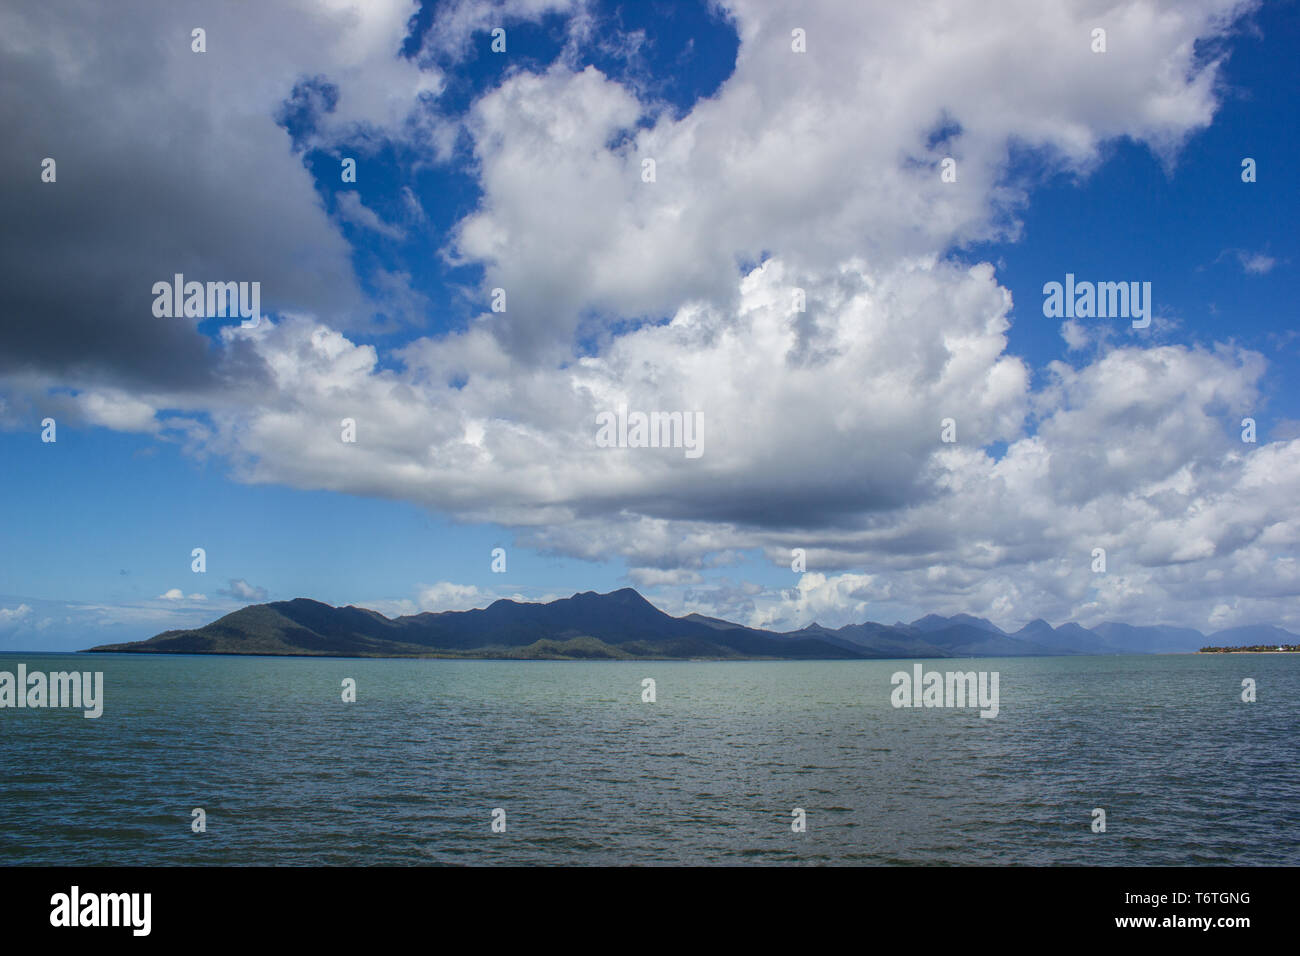 view to dunk island on a beautiful summer day, Missions beach, Queensland Stock Photo